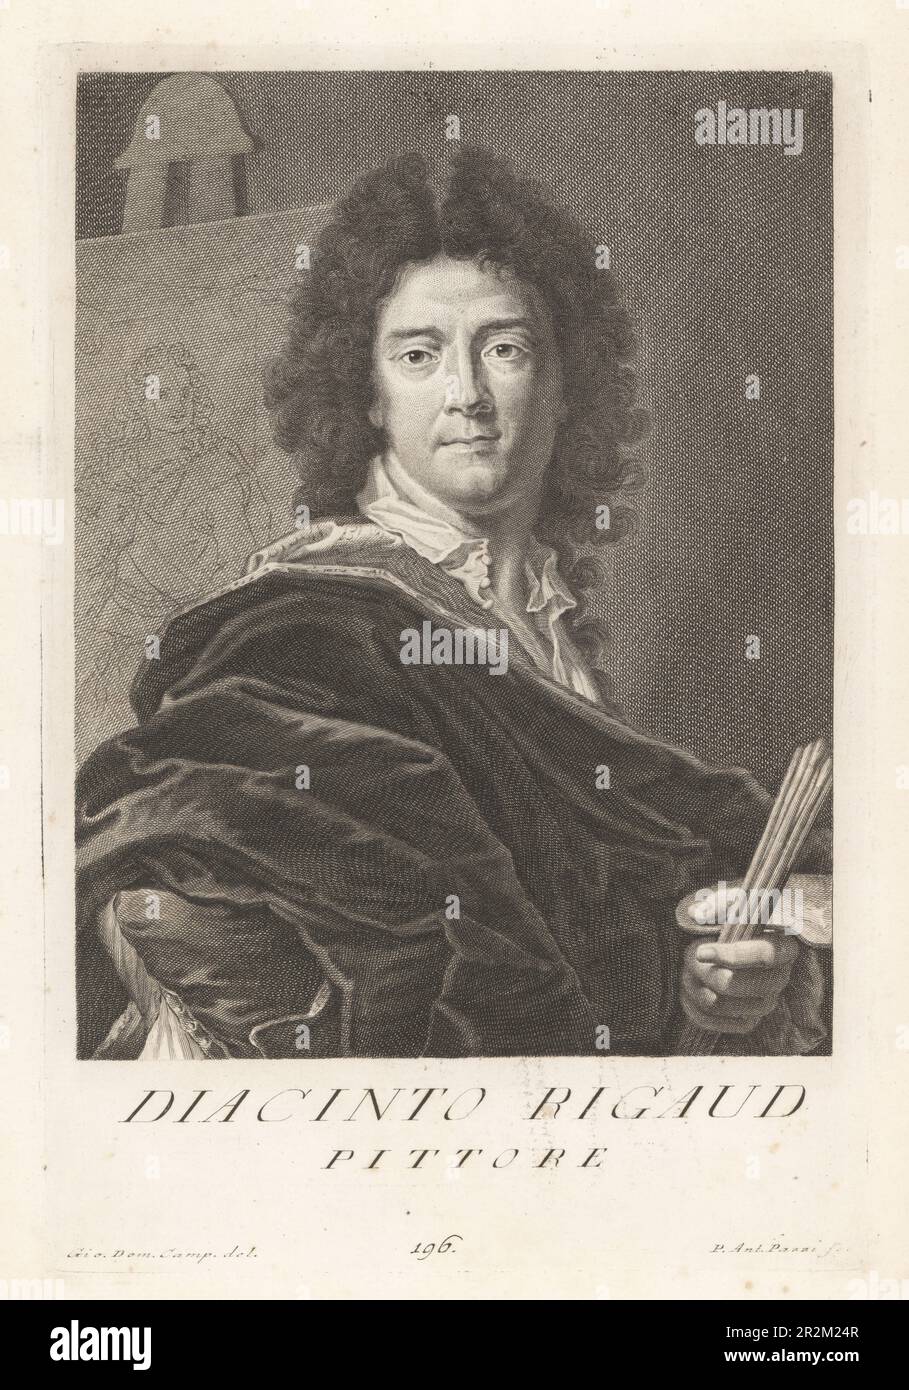 Jacint Rigau-Ros i Serra or Hyacinthe Rigaud, Catalan-French baroque painter most famous for his portraits of Louis XIV and the French nobility, 1659-1743. With palette and paintbrushes in front of canvas and easel. Diacinto Rigaud, Pittore. Copperplate engraving by Pietro Antonio Pazzi after Giovanni Domenico Campiglia after a self portrait by the artist from Francesco Moucke's Museo Florentino (Museum Florentinum), Serie di Ritratti de Pittori (Series of Portraits of Painters) stamperia Mouckiana, Florence, 1752-62. Stock Photo